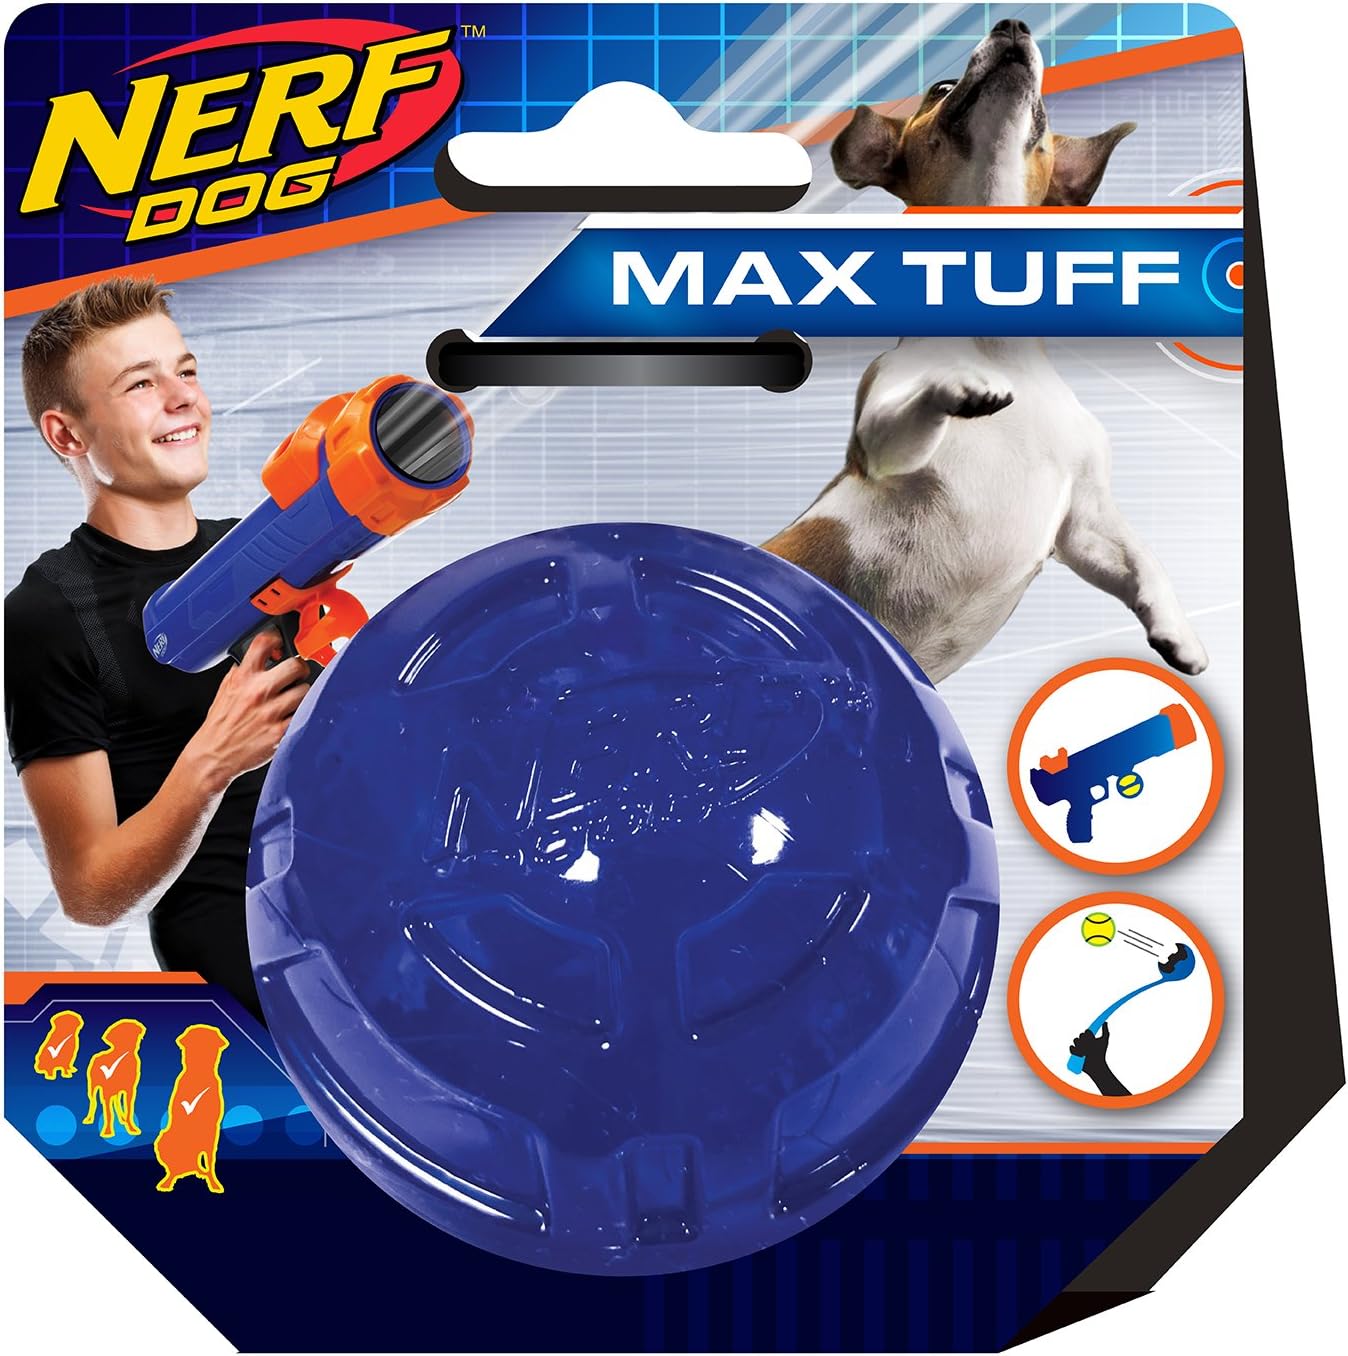 Nerf+Dog+Ultra+Tough+Rubber+Ball+Dog+Toy%2c+Lightweight%2c+Durable+and+Water+Resistant%2c+2.5+Inches%2c+For+Small%2fMedium%2fLarge+Breeds%2c+Single+Unit%2c+Blue